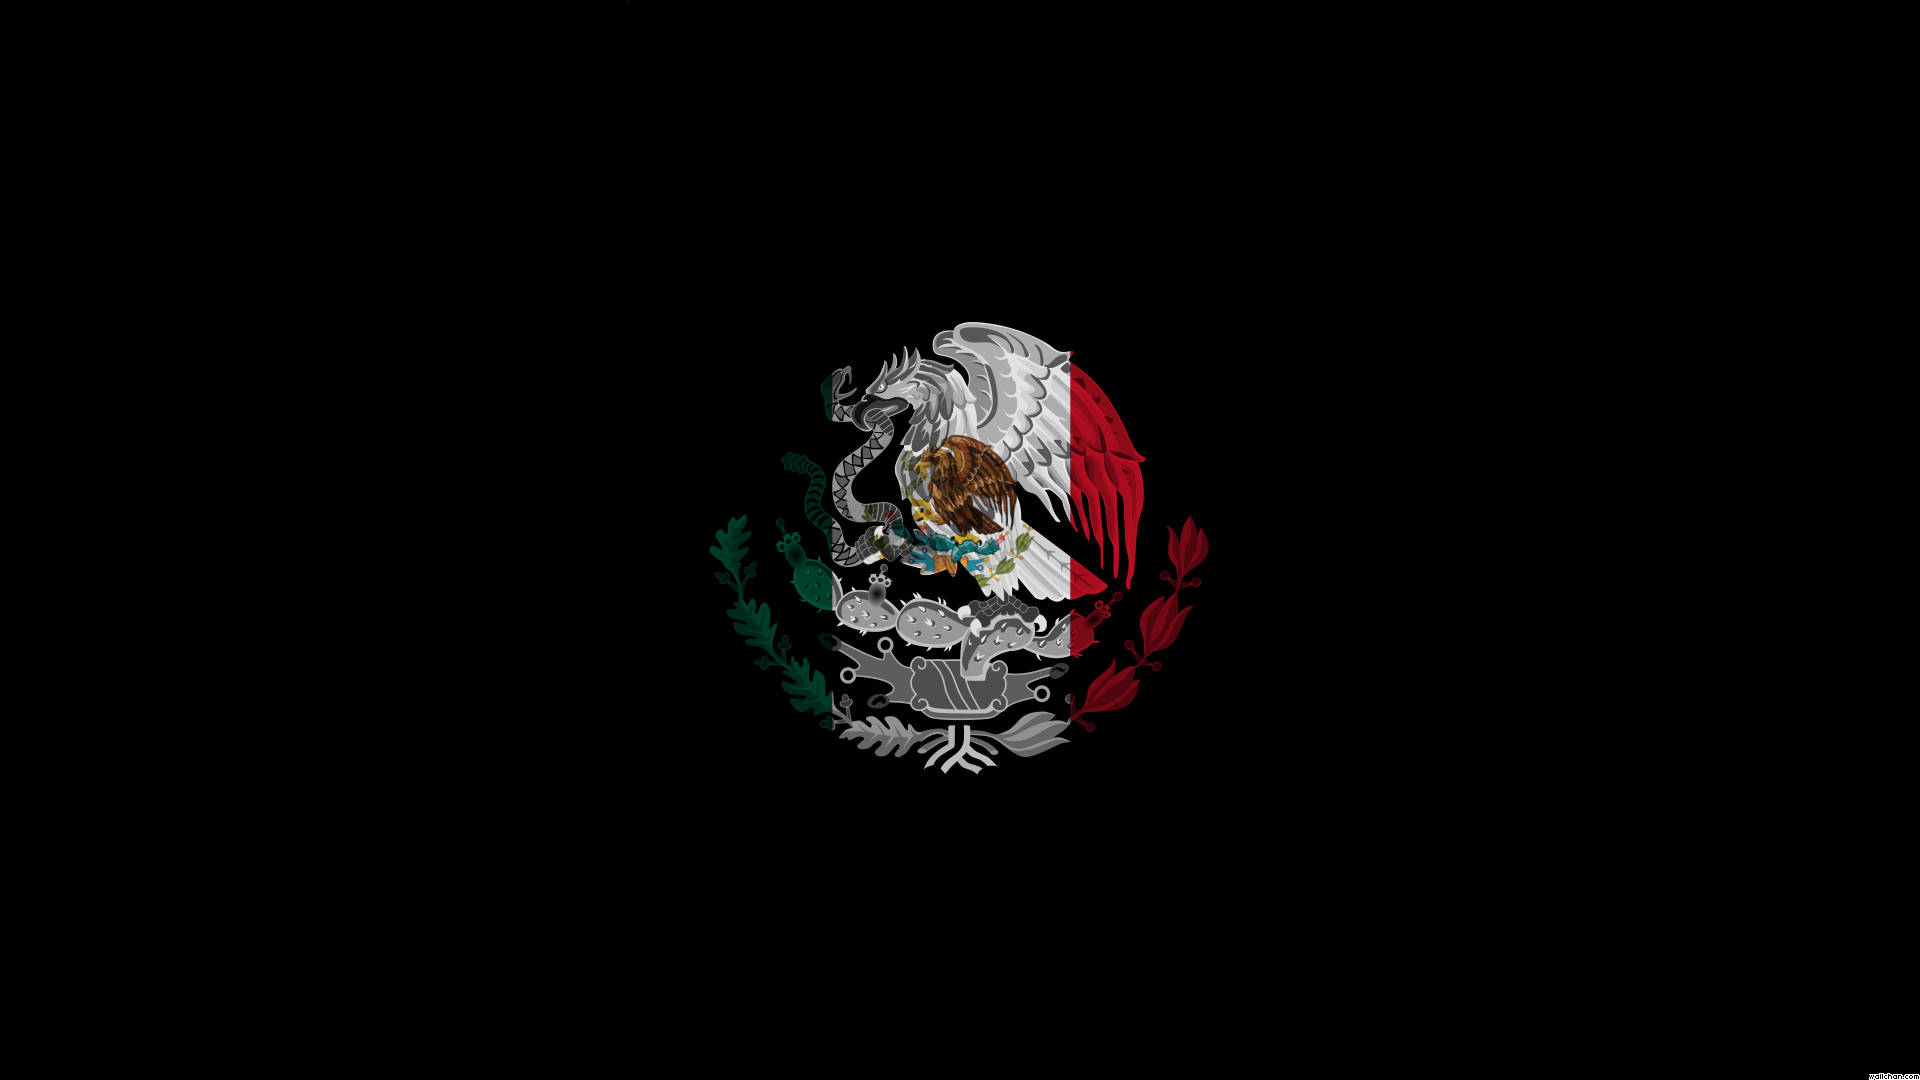 Golden Eagle Of Mexico Flag Background